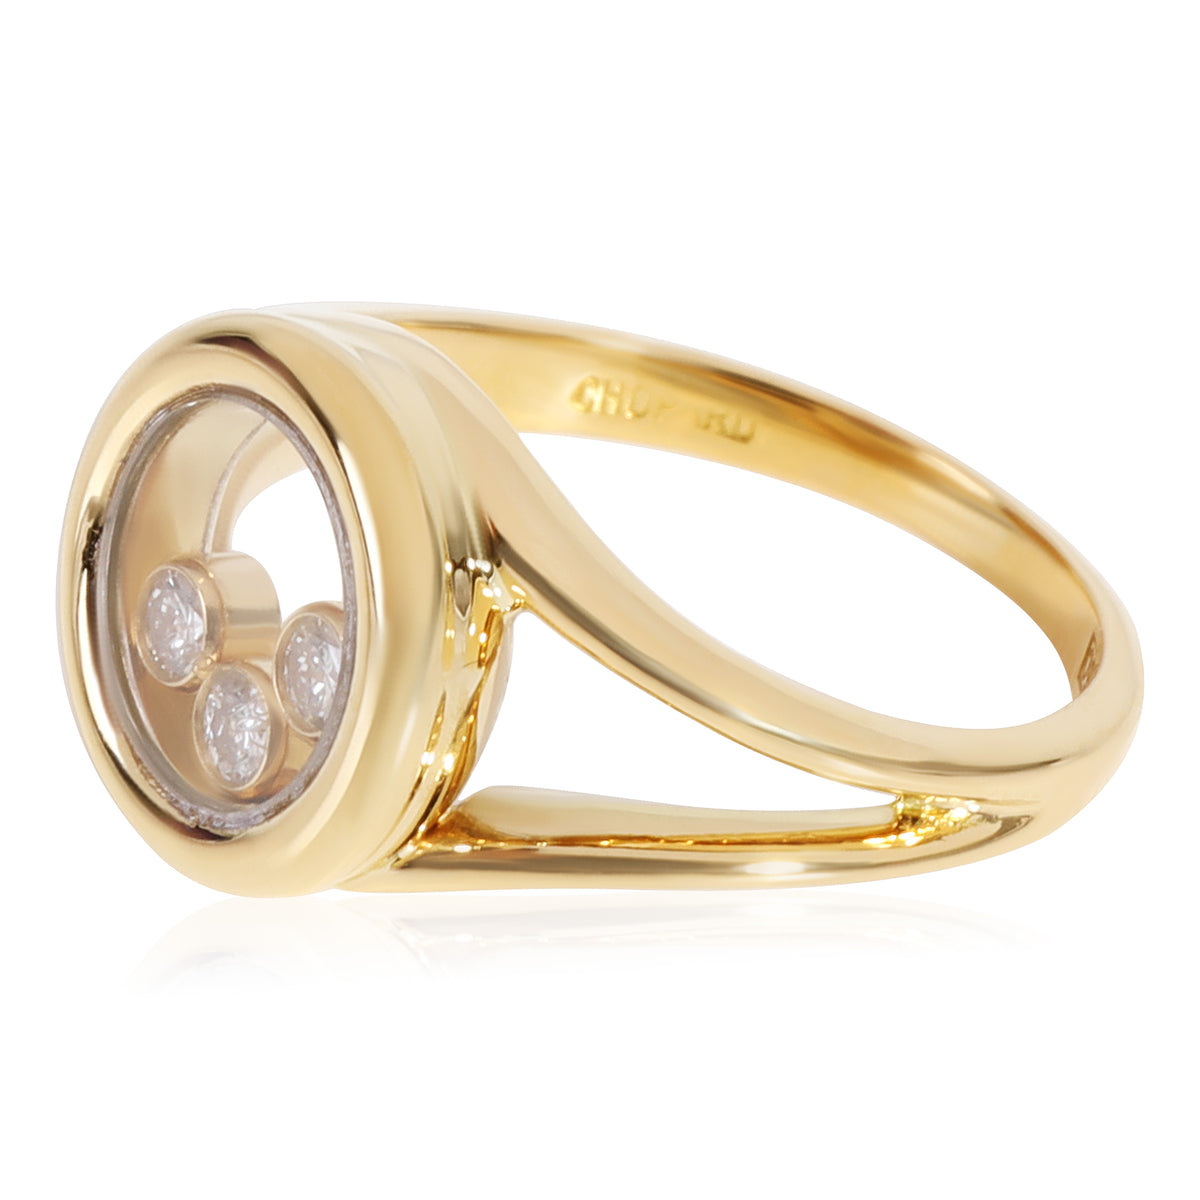 Chopard Happy Diamonds Icon Ring in 18k Yellow Gold 0.17 CTW